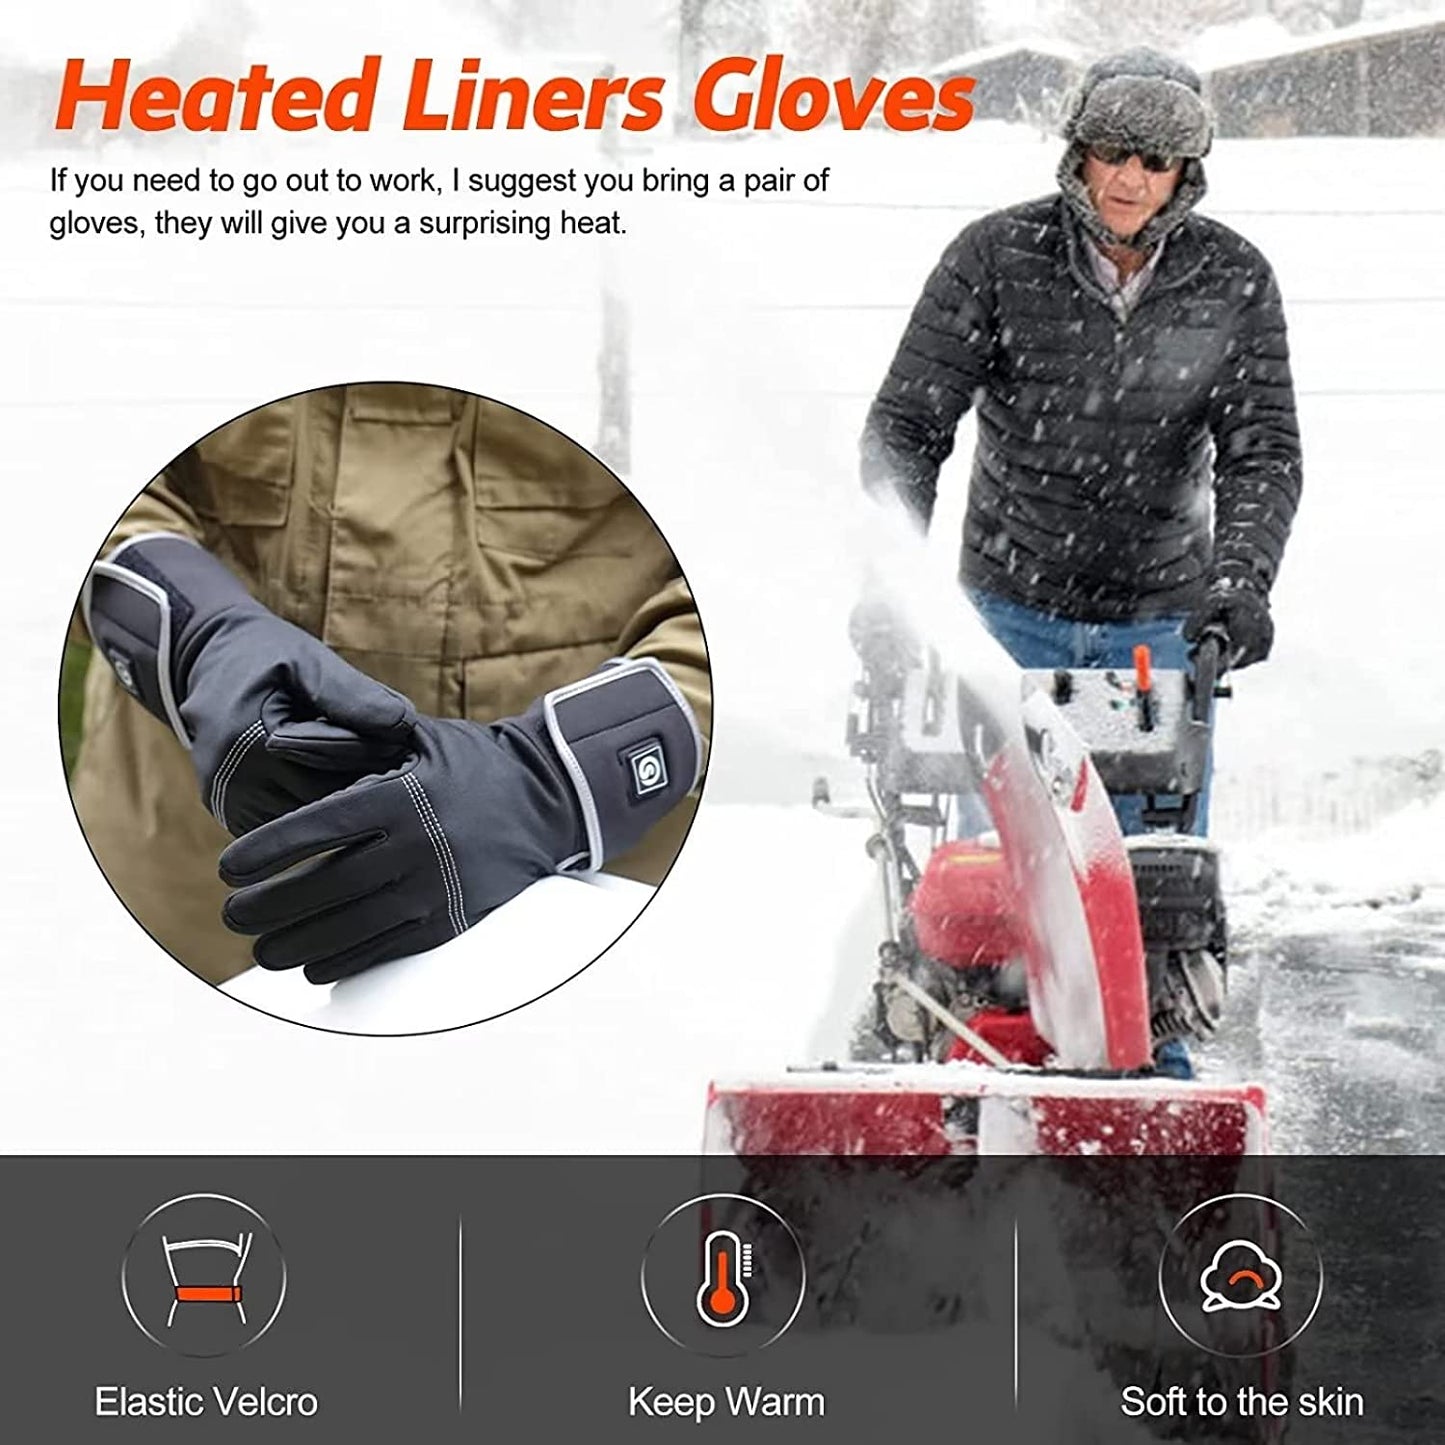 Heated Gloves Rechargeable Electric Battery - Breathable Heated Gloves Liners for Men Women,Winter Heated Thin Gloves Touchscreen Riding Skiing Snowboarding Hiking Cycling Hunting Hand Warmer